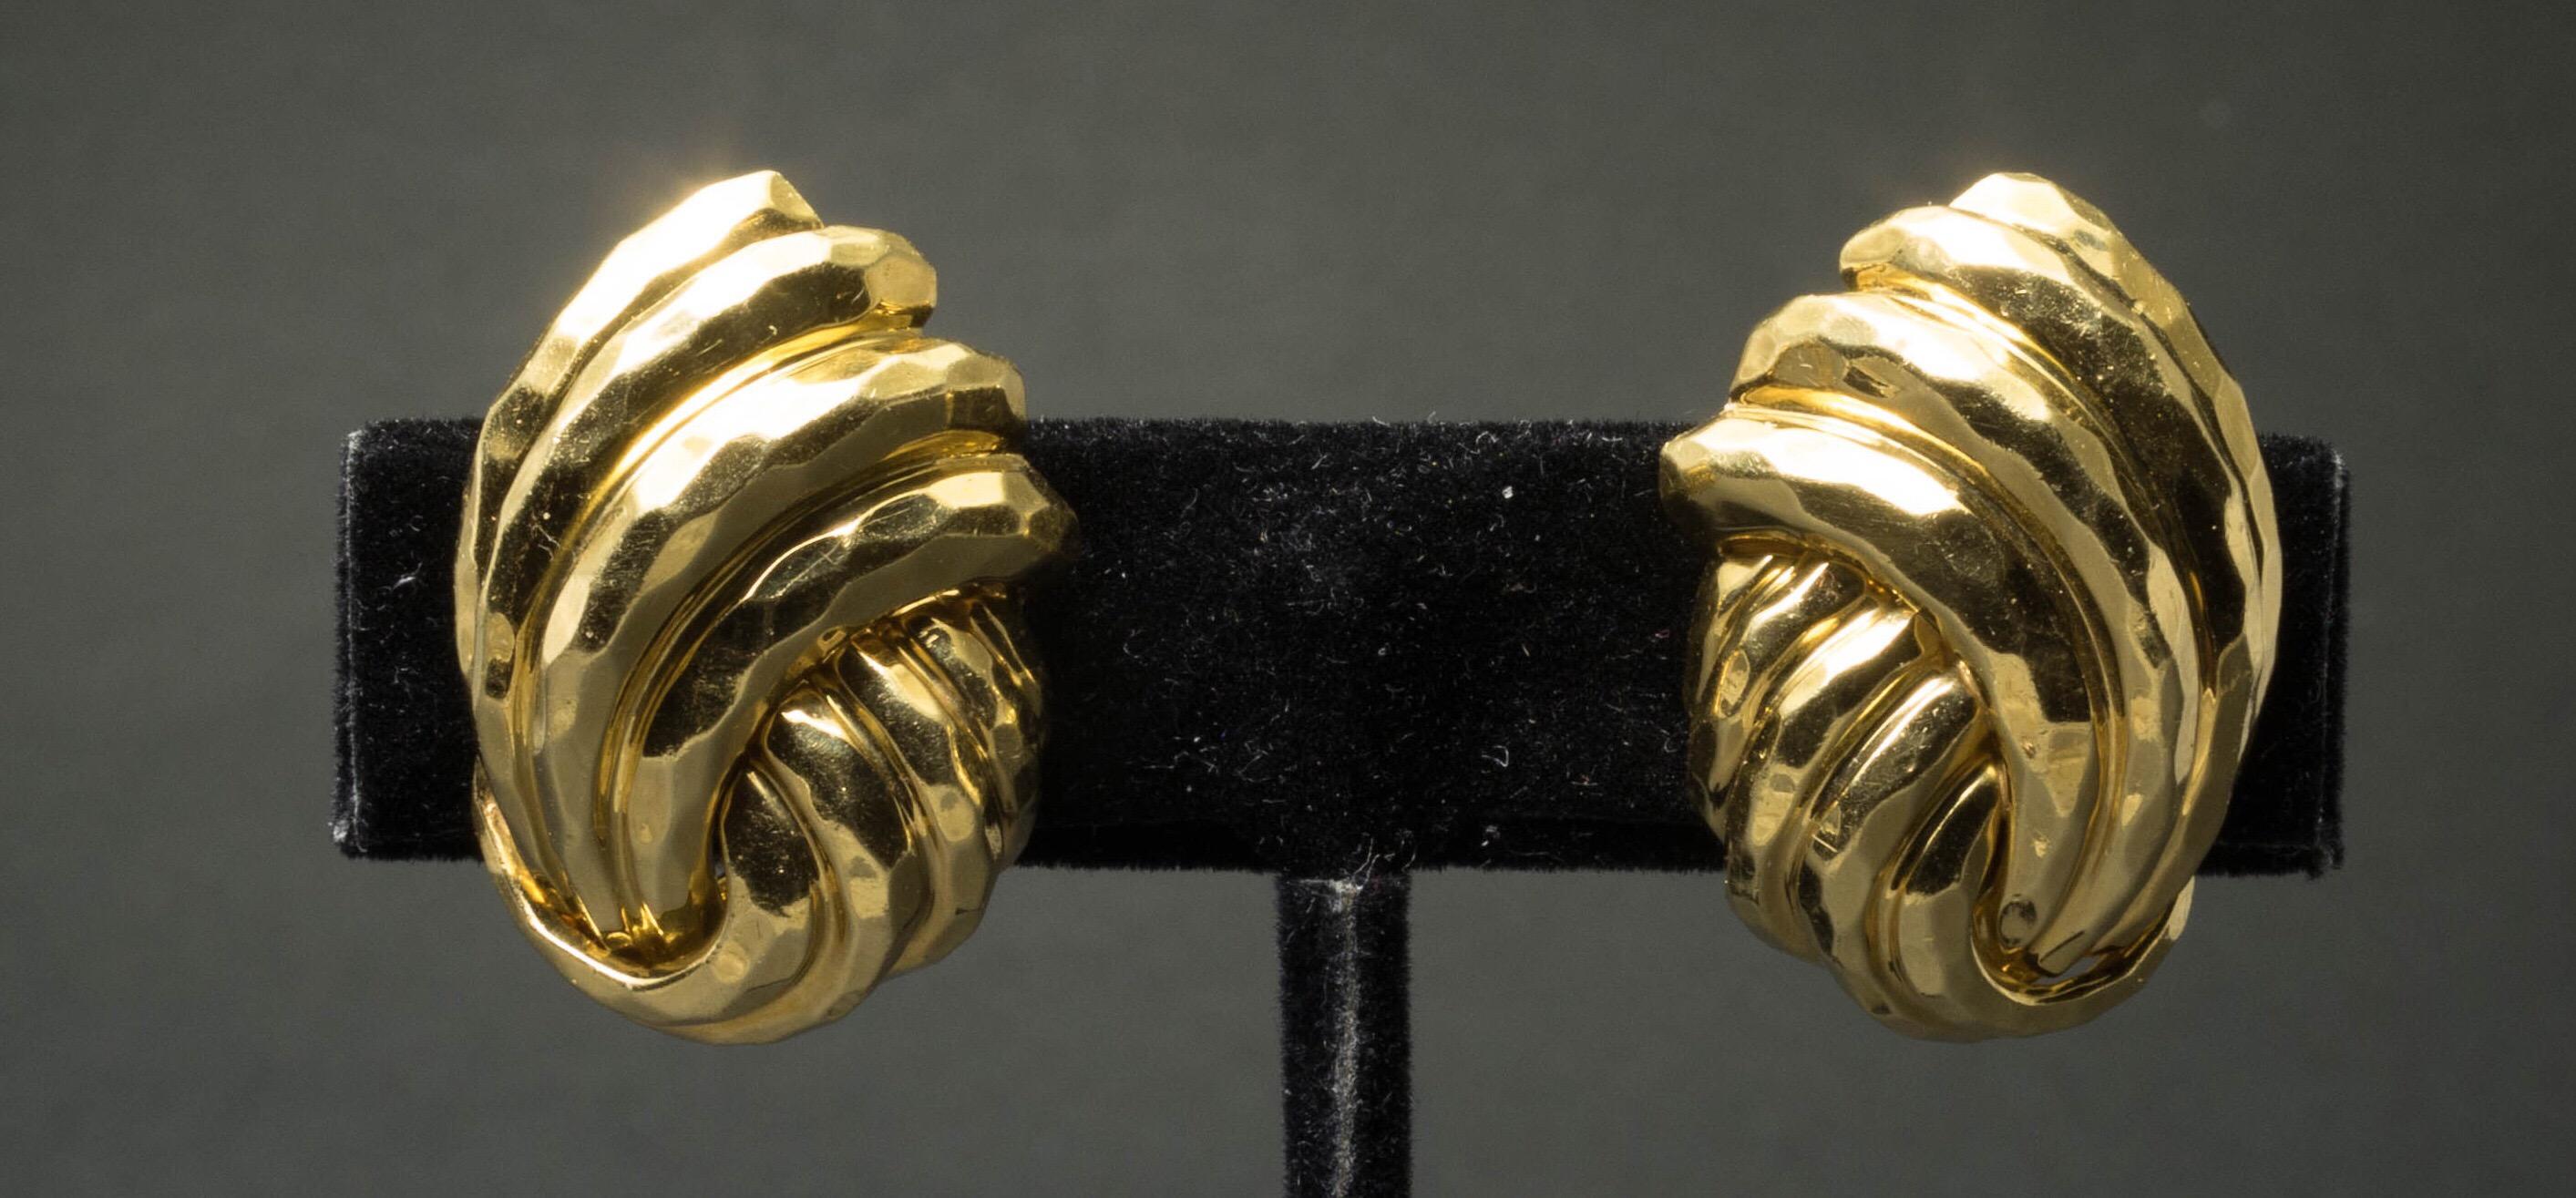 A pair of elegance and classy hand hammered 18K yellow gold clip earrings by Henry Dunay. From the 1970's.
Signed Dunay. 18K 
Length: 1.1